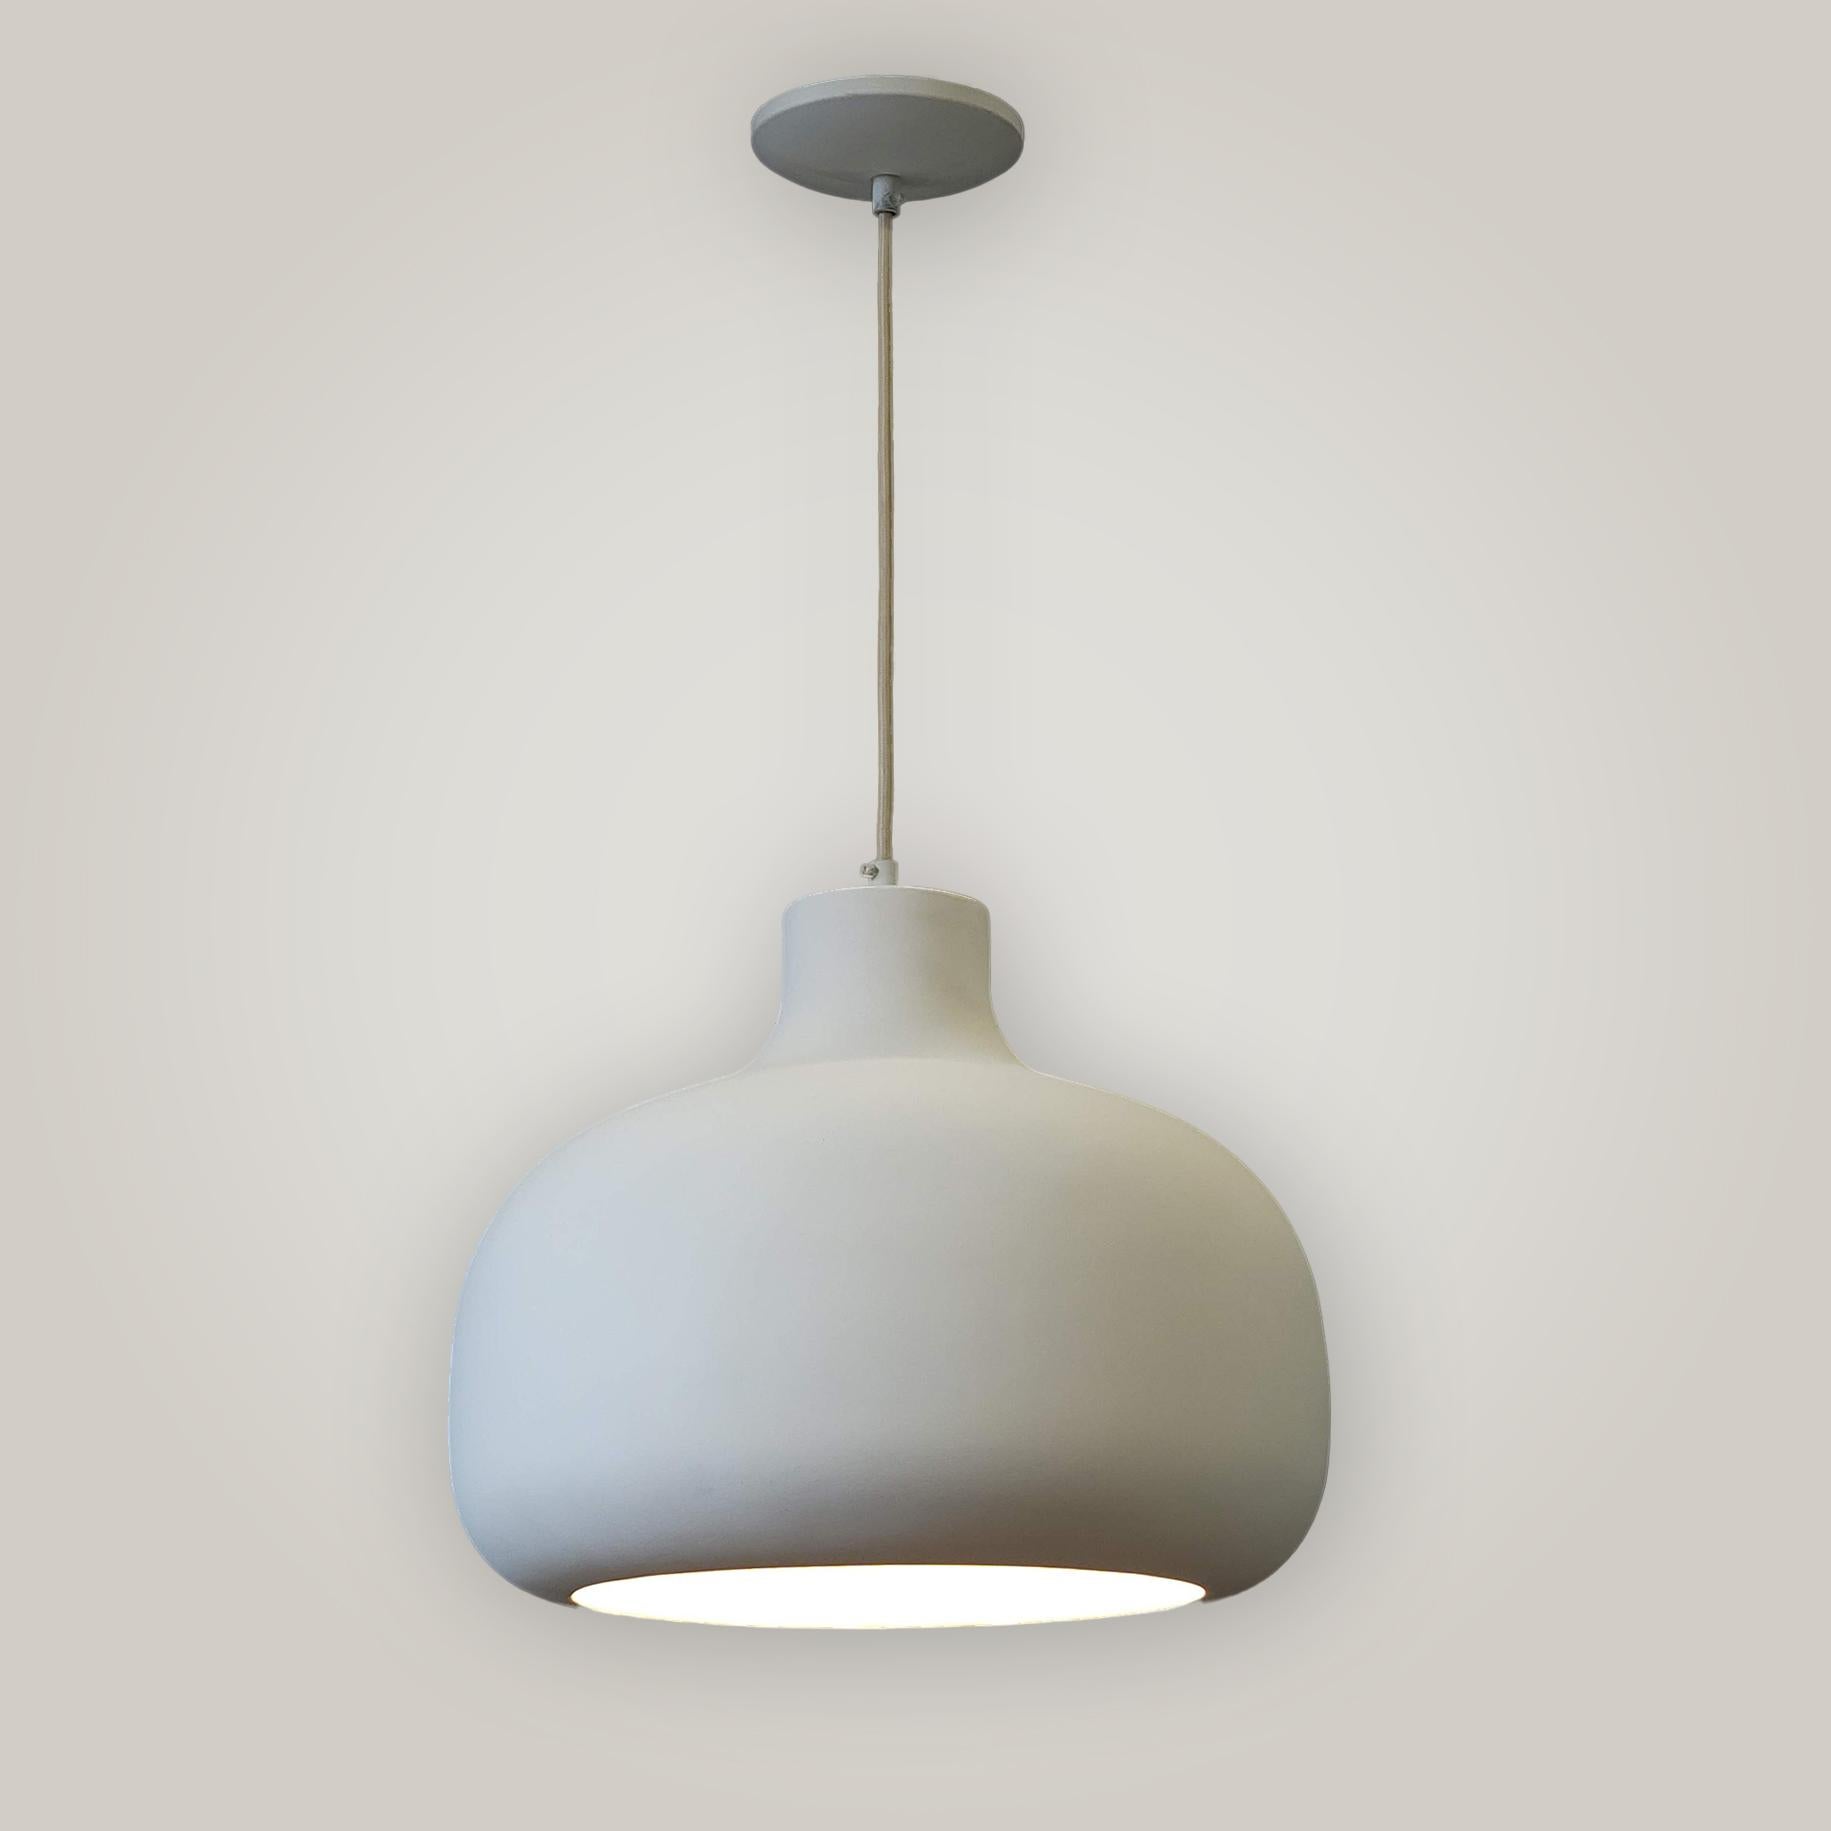 Crafted with care in New York, USA, our minimalist plaster pendant light fixture adds a touch of modern elegance to any room. This handcrafted piece is designed to blend seamlessly into your home decor. Suitable for dining areas, living rooms, or